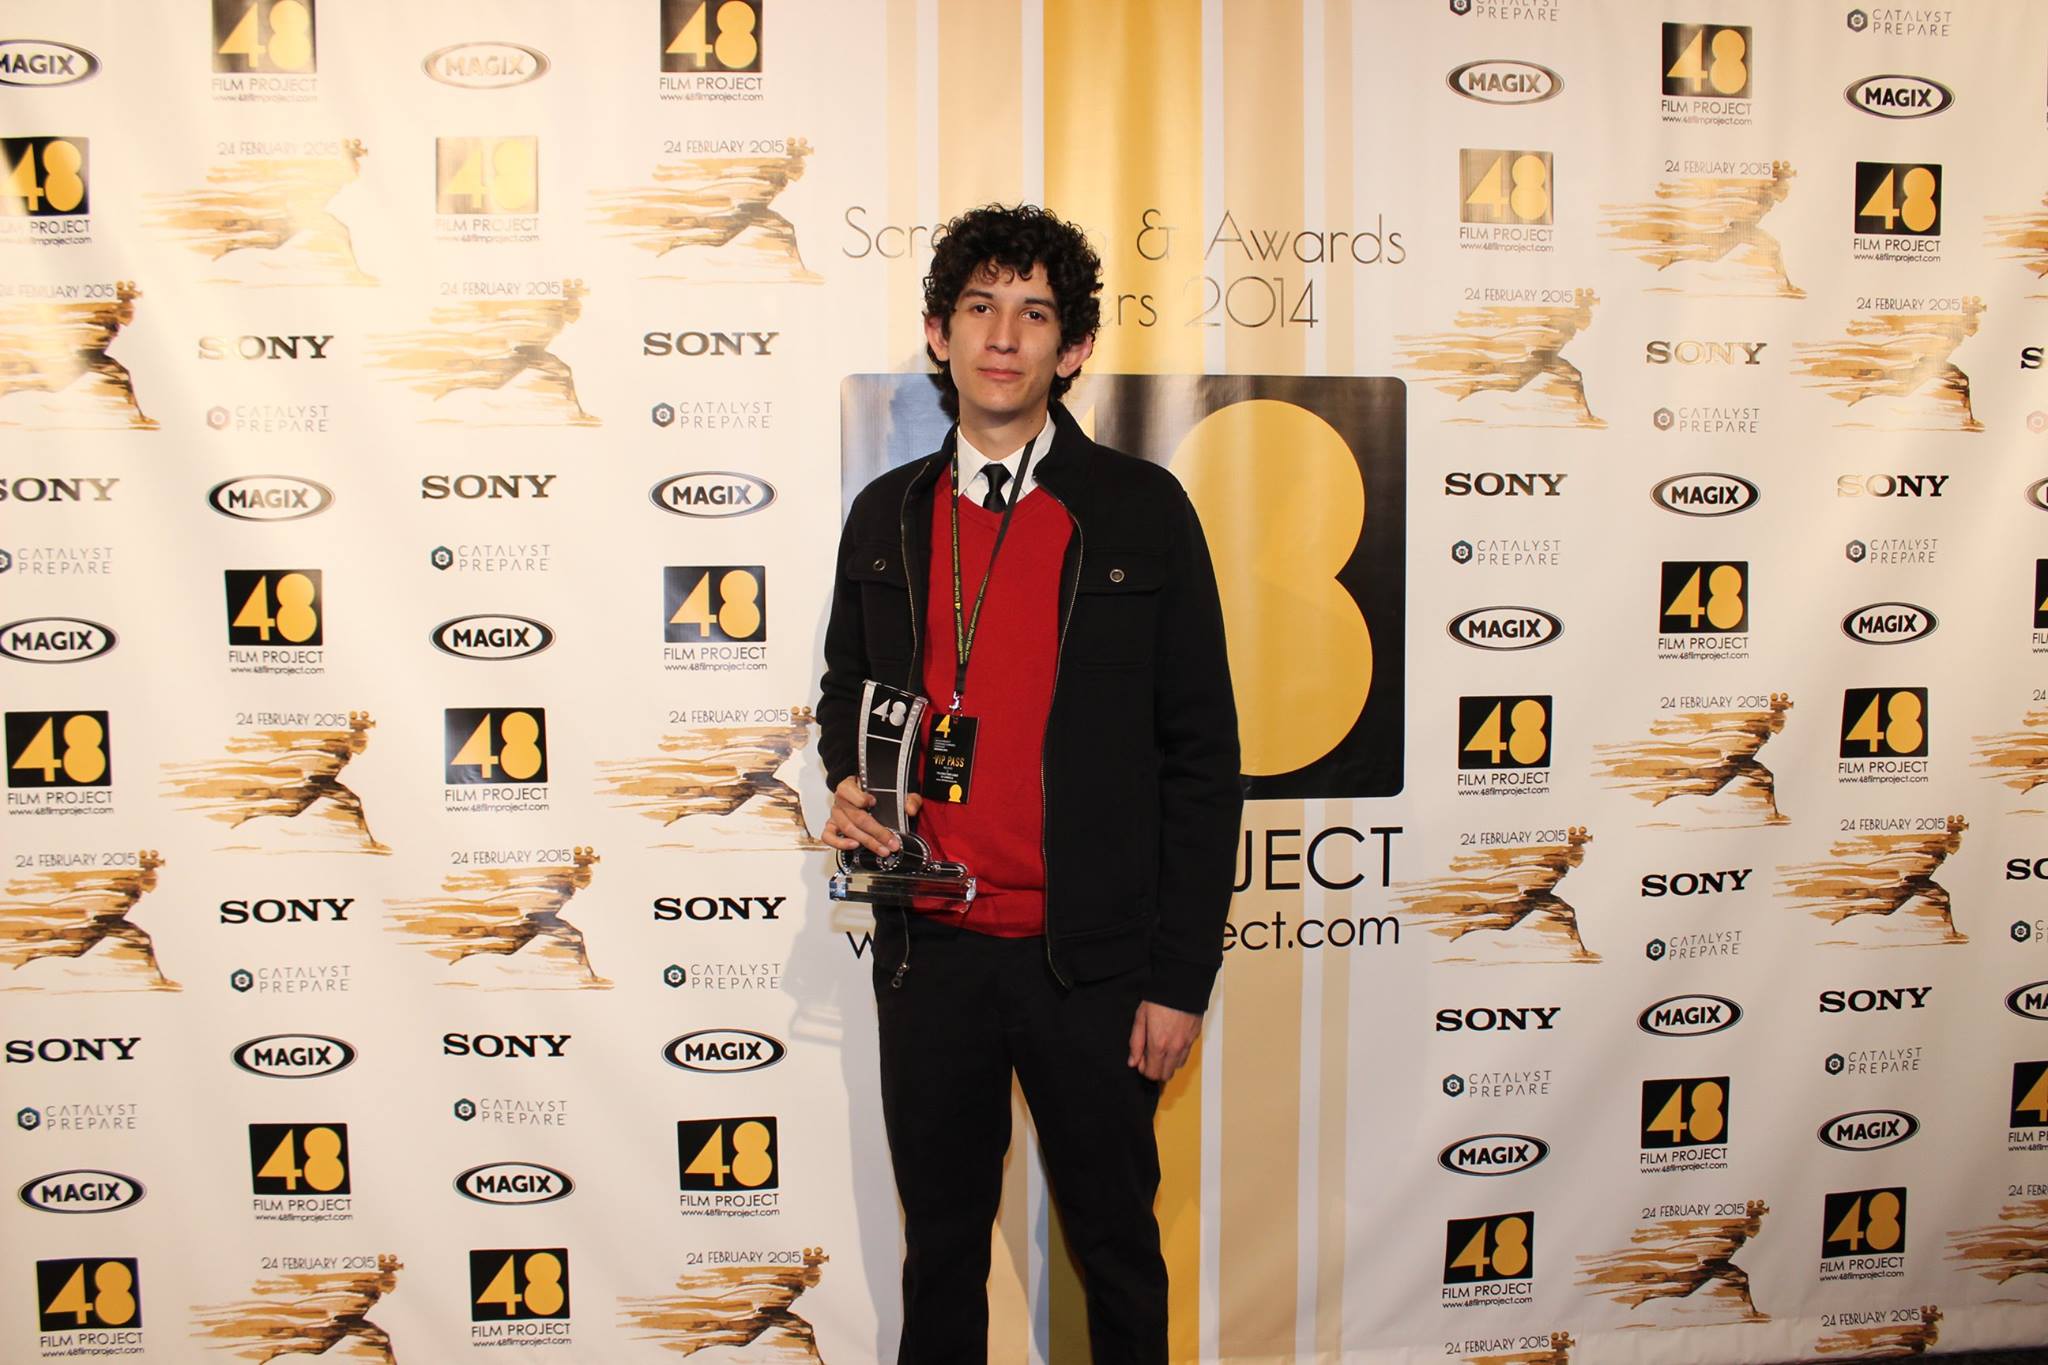 Aaron Morga receiving the award for Best Editor at the Directors Guild of America in Hollywood, CA